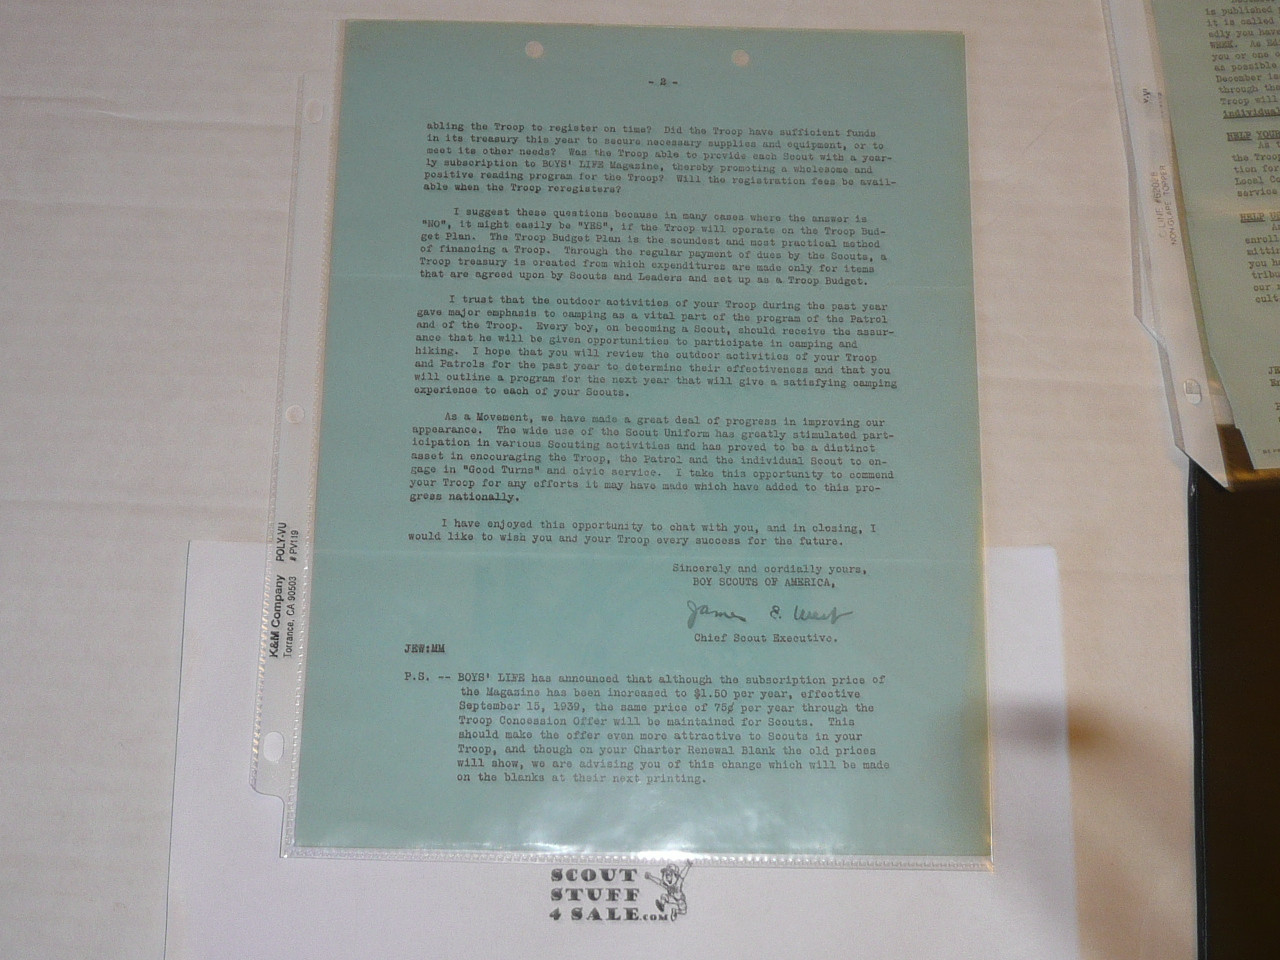 1939 Letter on Boy Scout National Headquarters Stationary From James West regarding rechartering, 2 pages